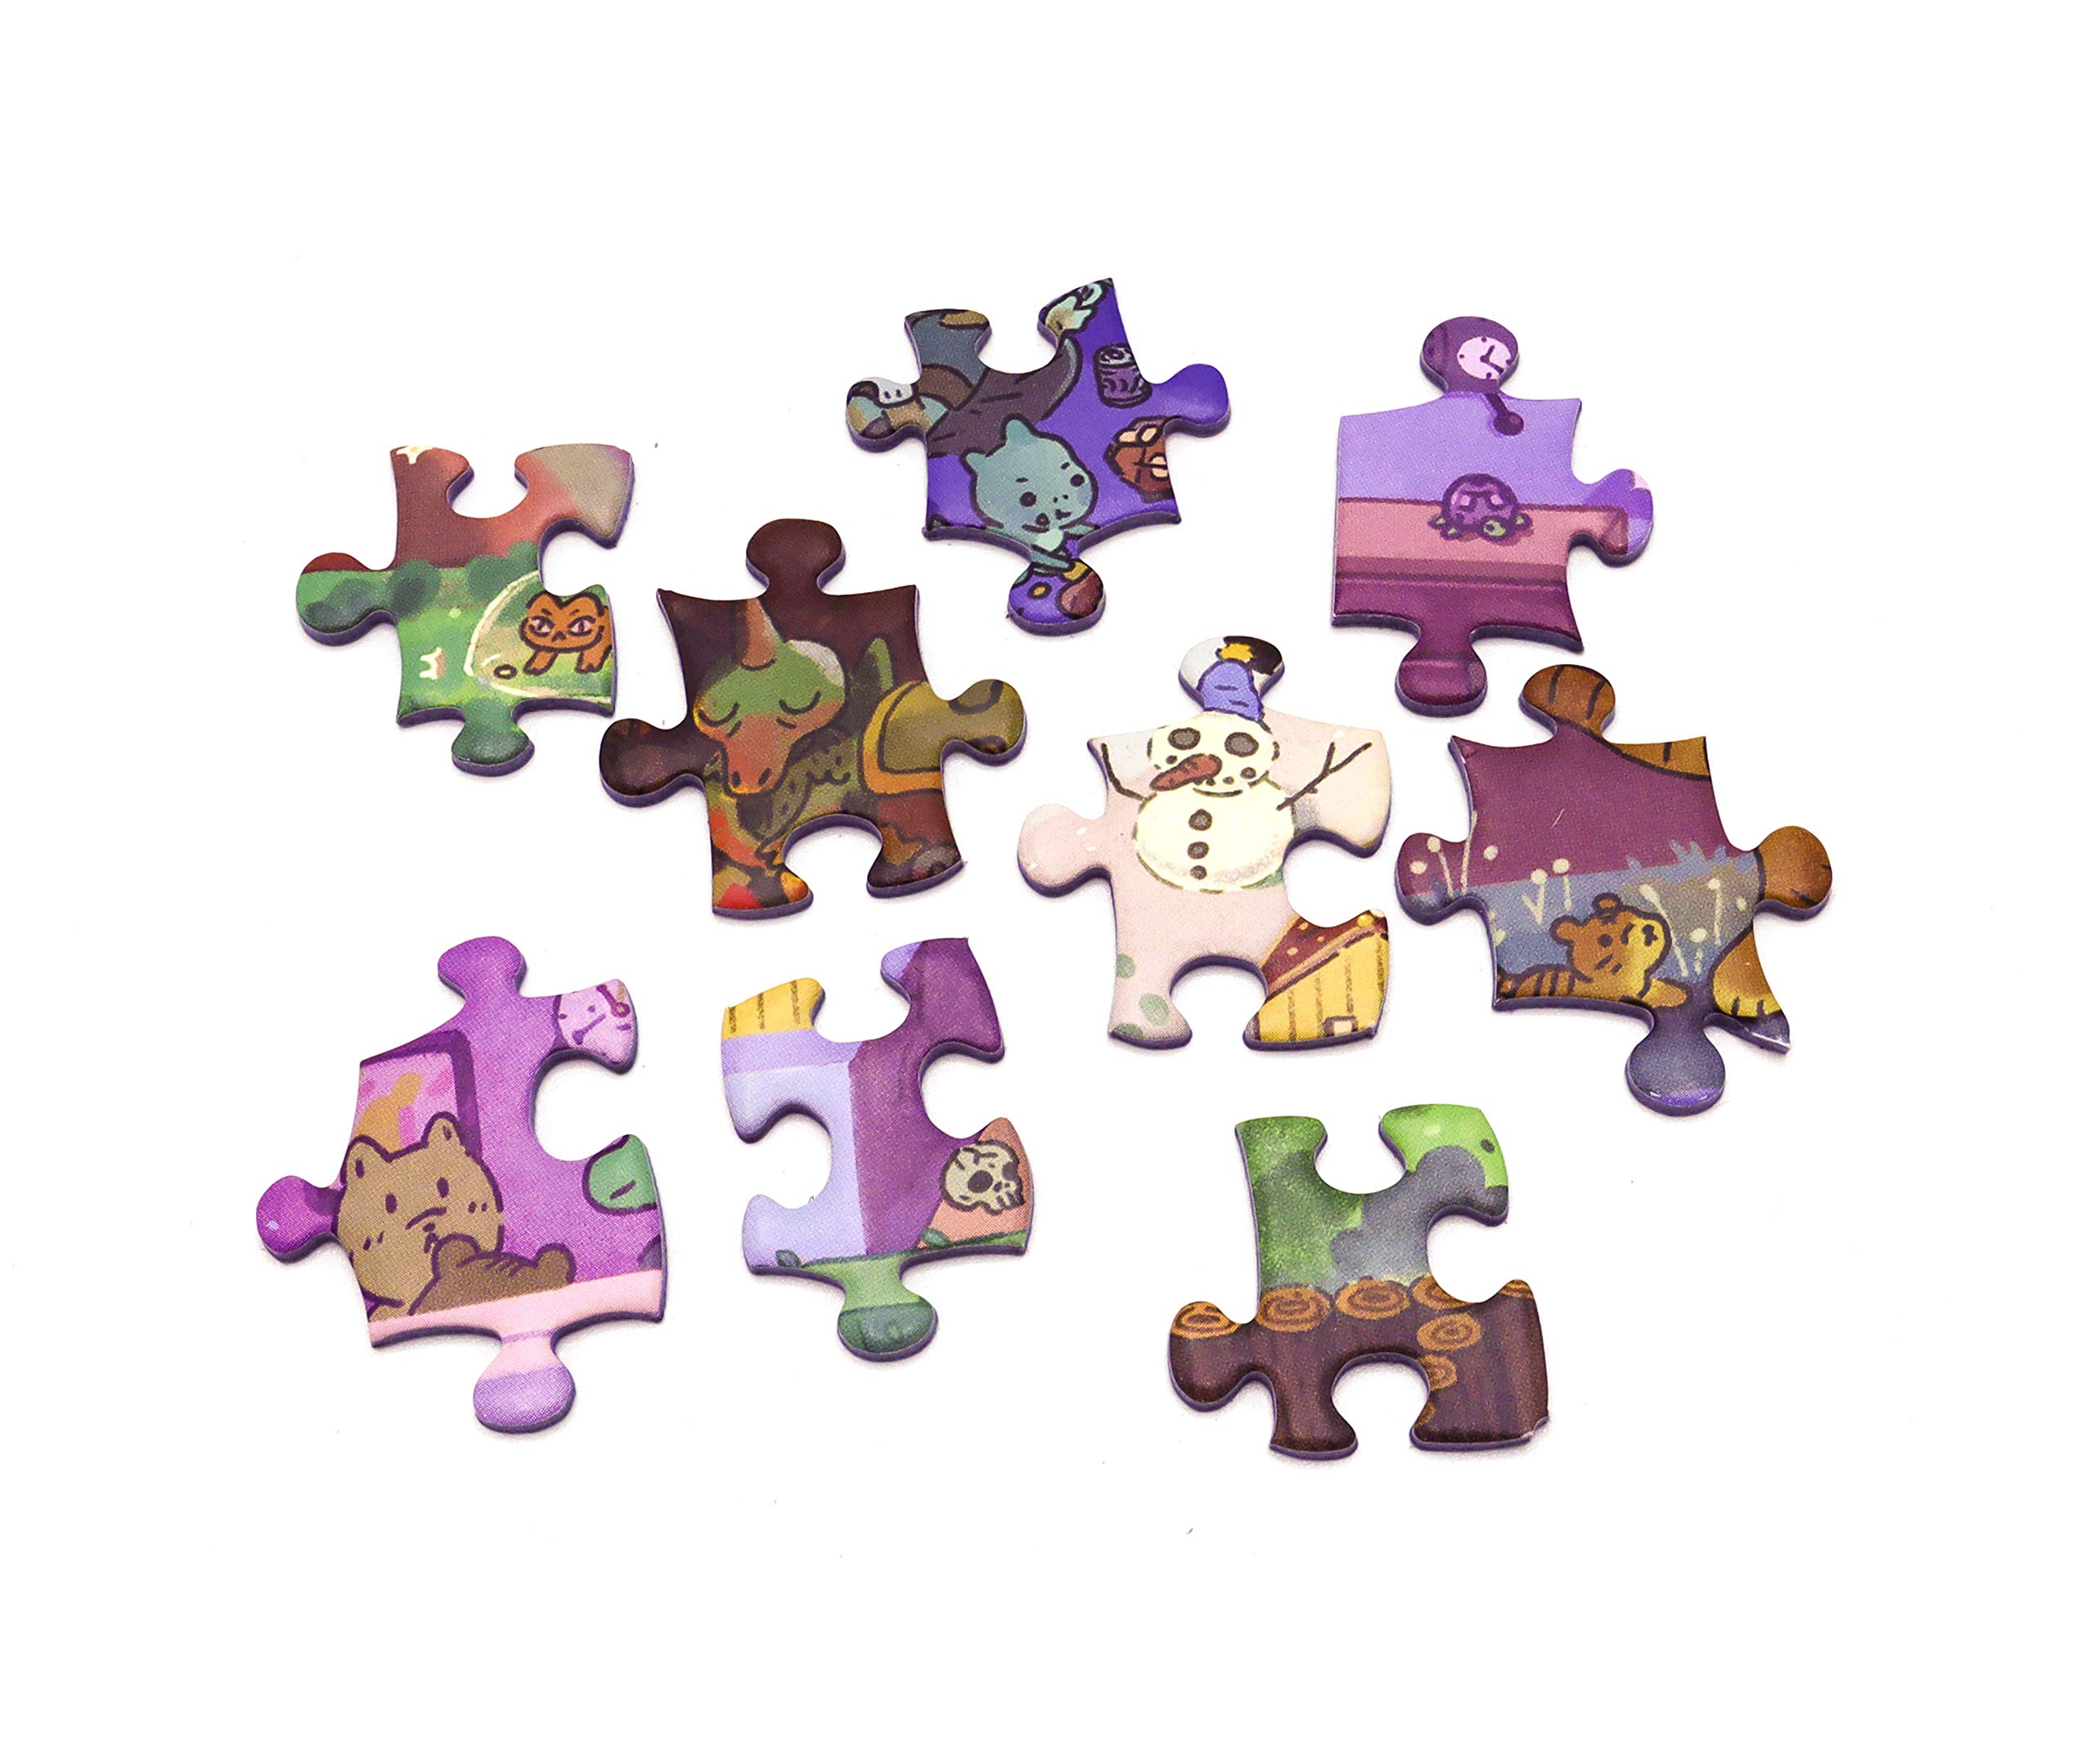 The Mystic Maze • 1000-Piece Jigsaw Puzzle from The Magic Puzzle Company • Series One